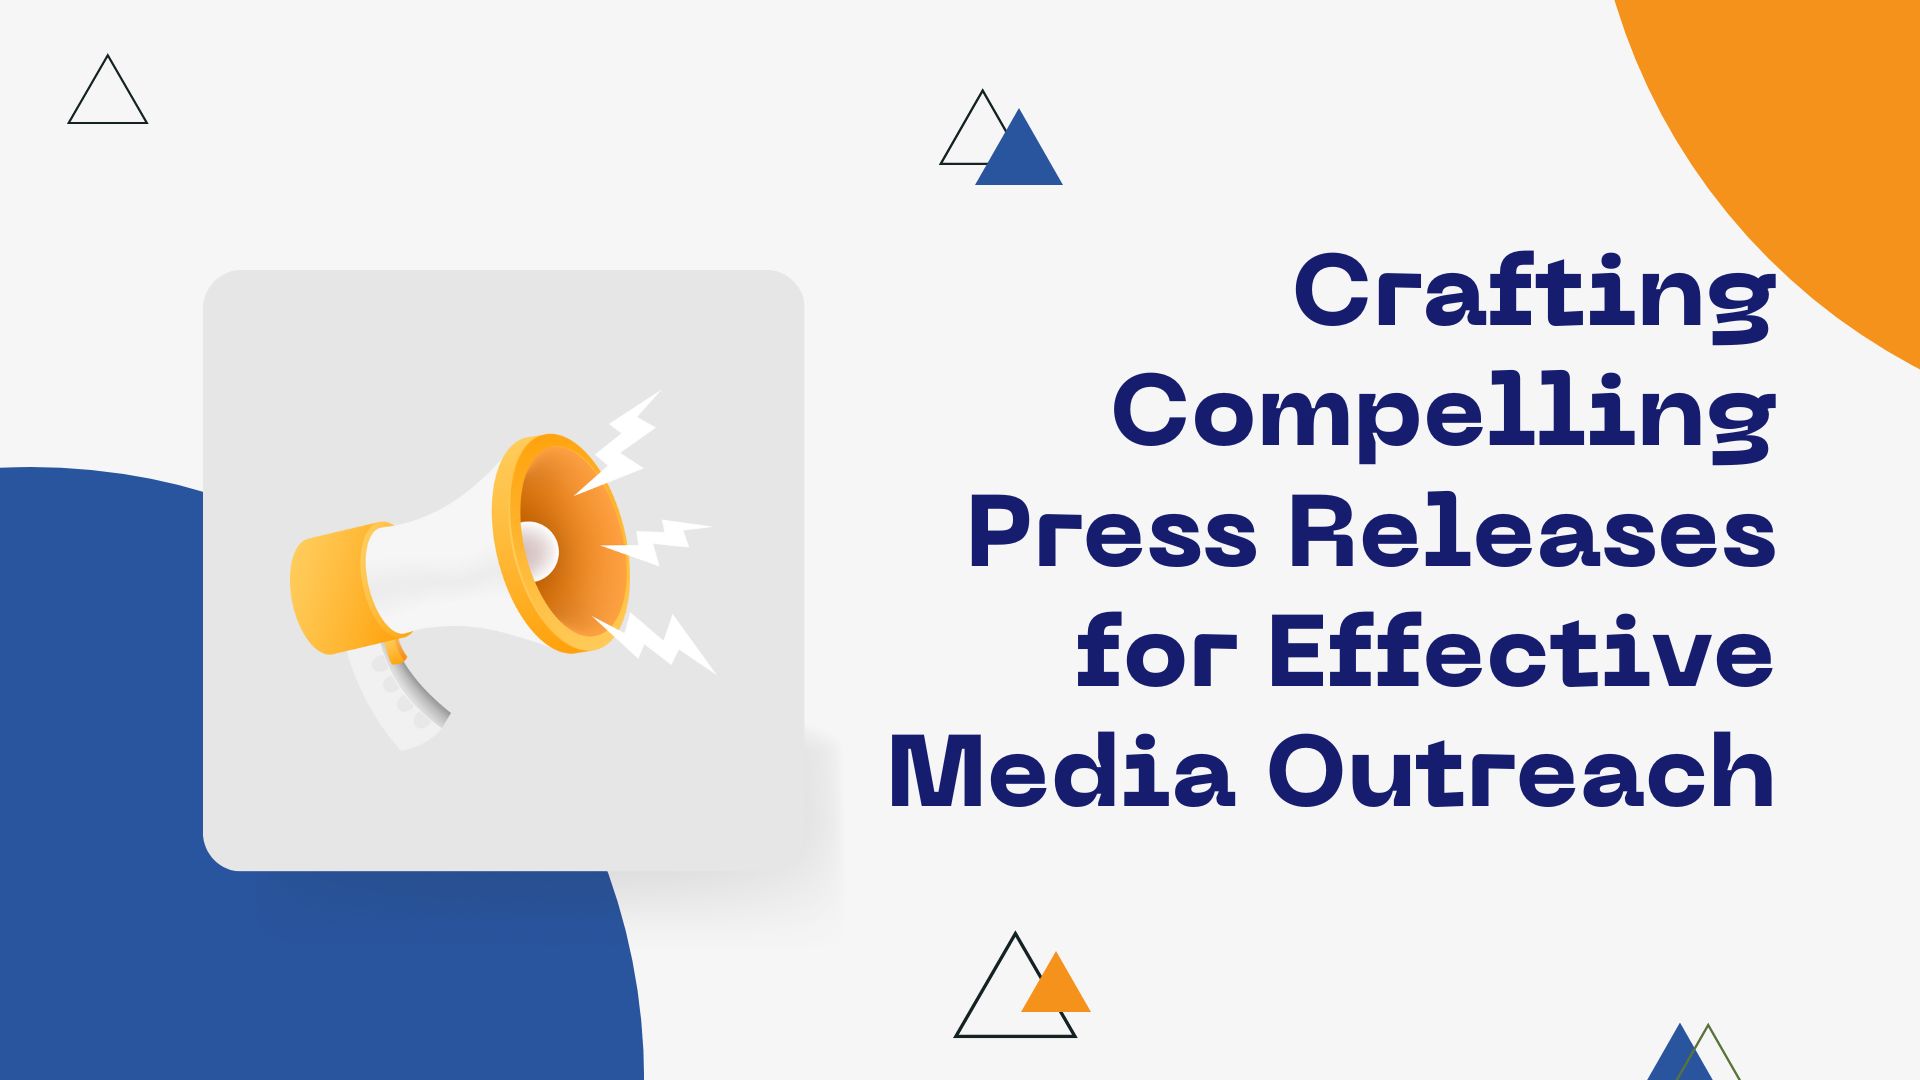 Crafting Compelling Press Releases for Effective Media Outreach